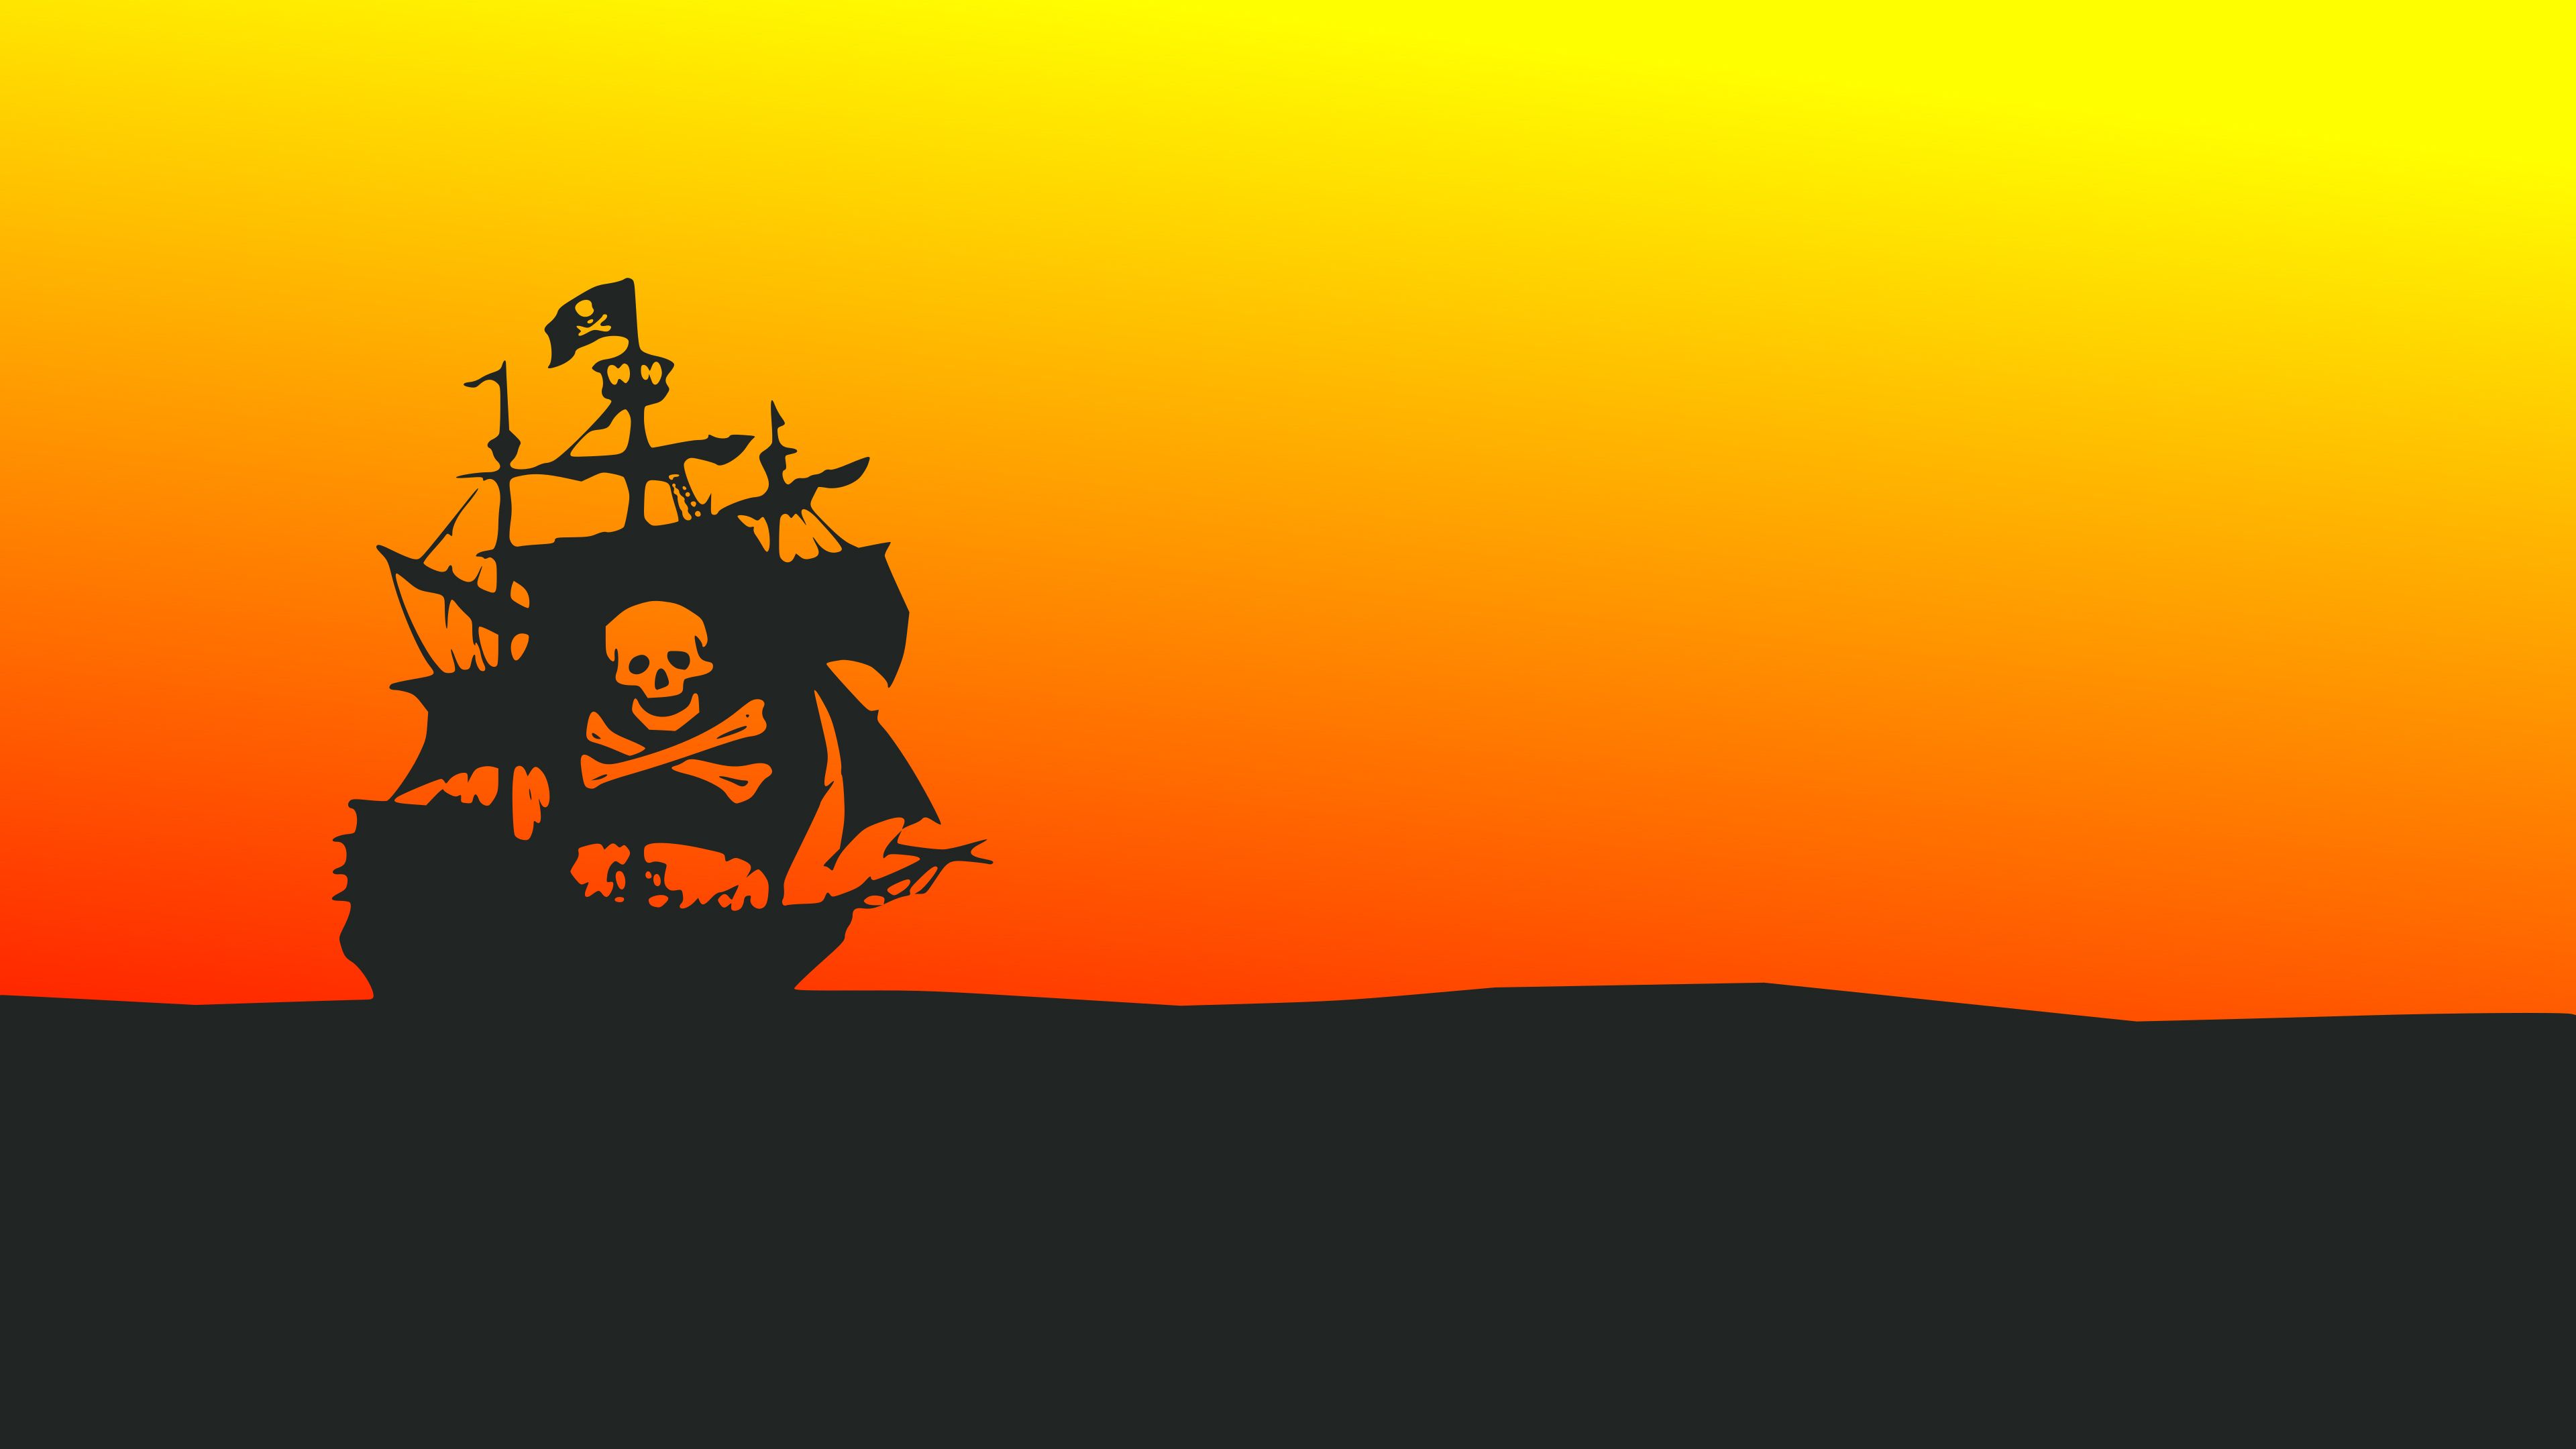 A pirate ship sails through the ocean at sunset. - Pirate